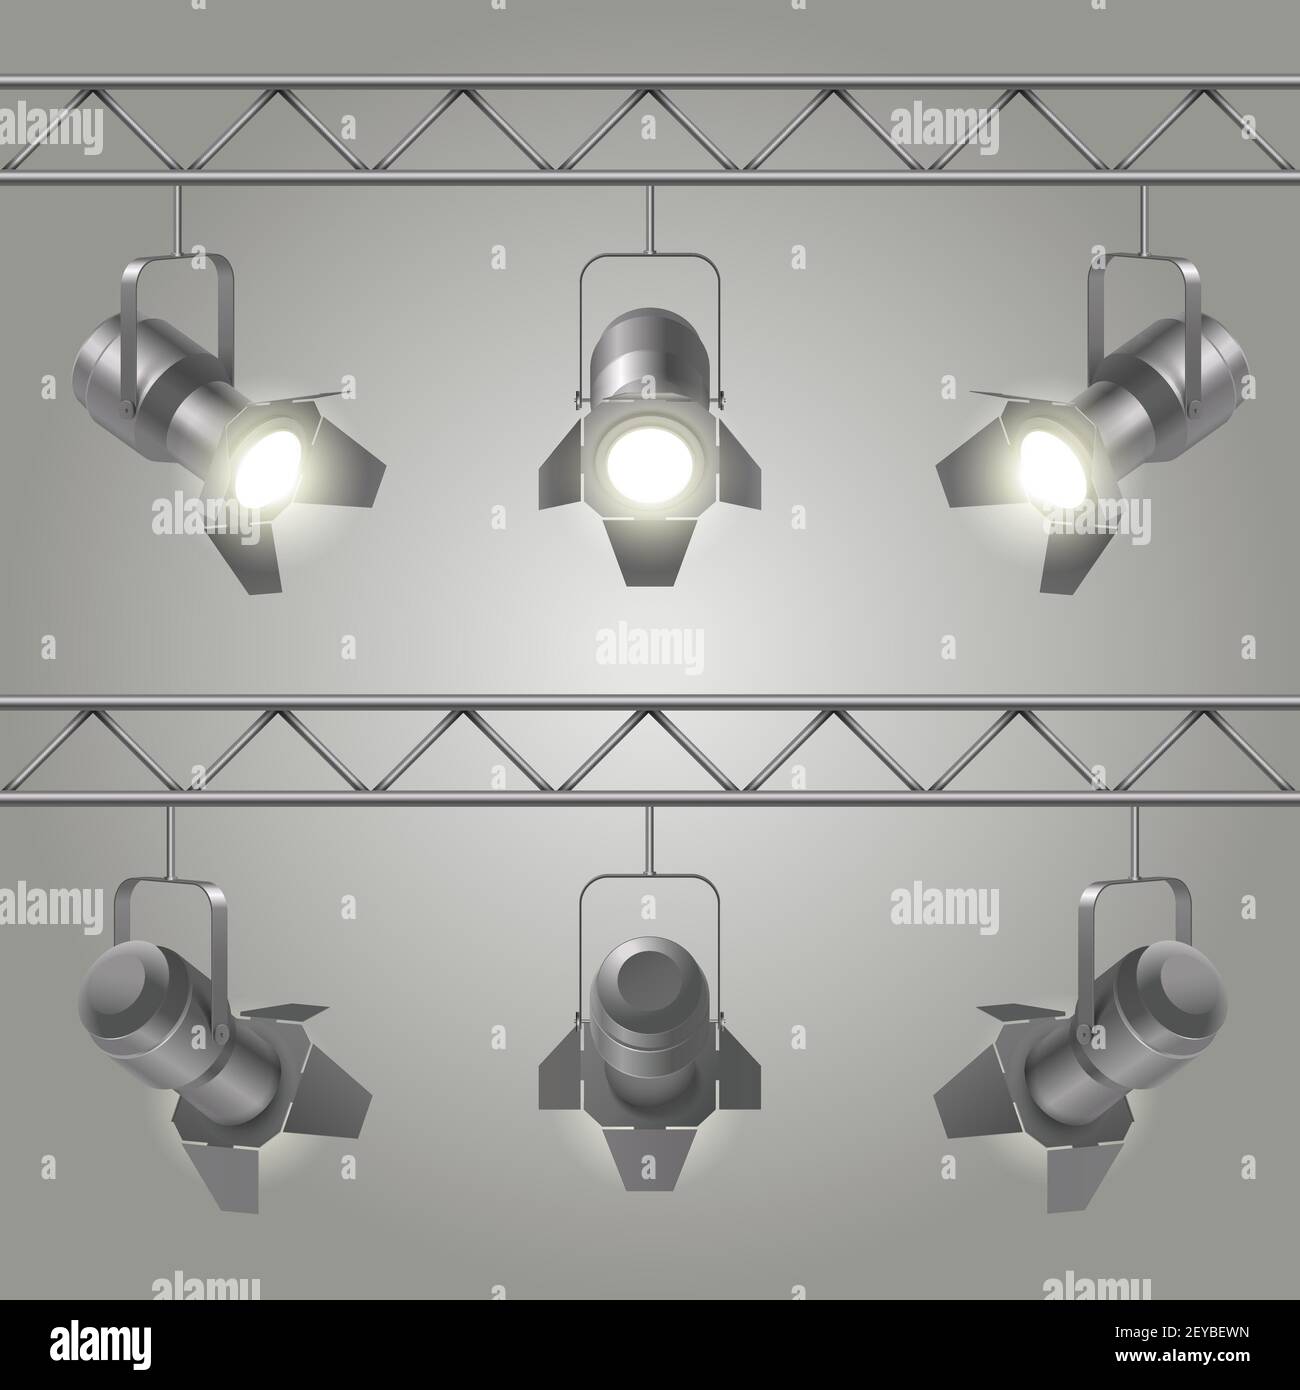 Realistic spotlights set hanging on iron slabs of ceiling and shines on stage vector illustration Stock Vector